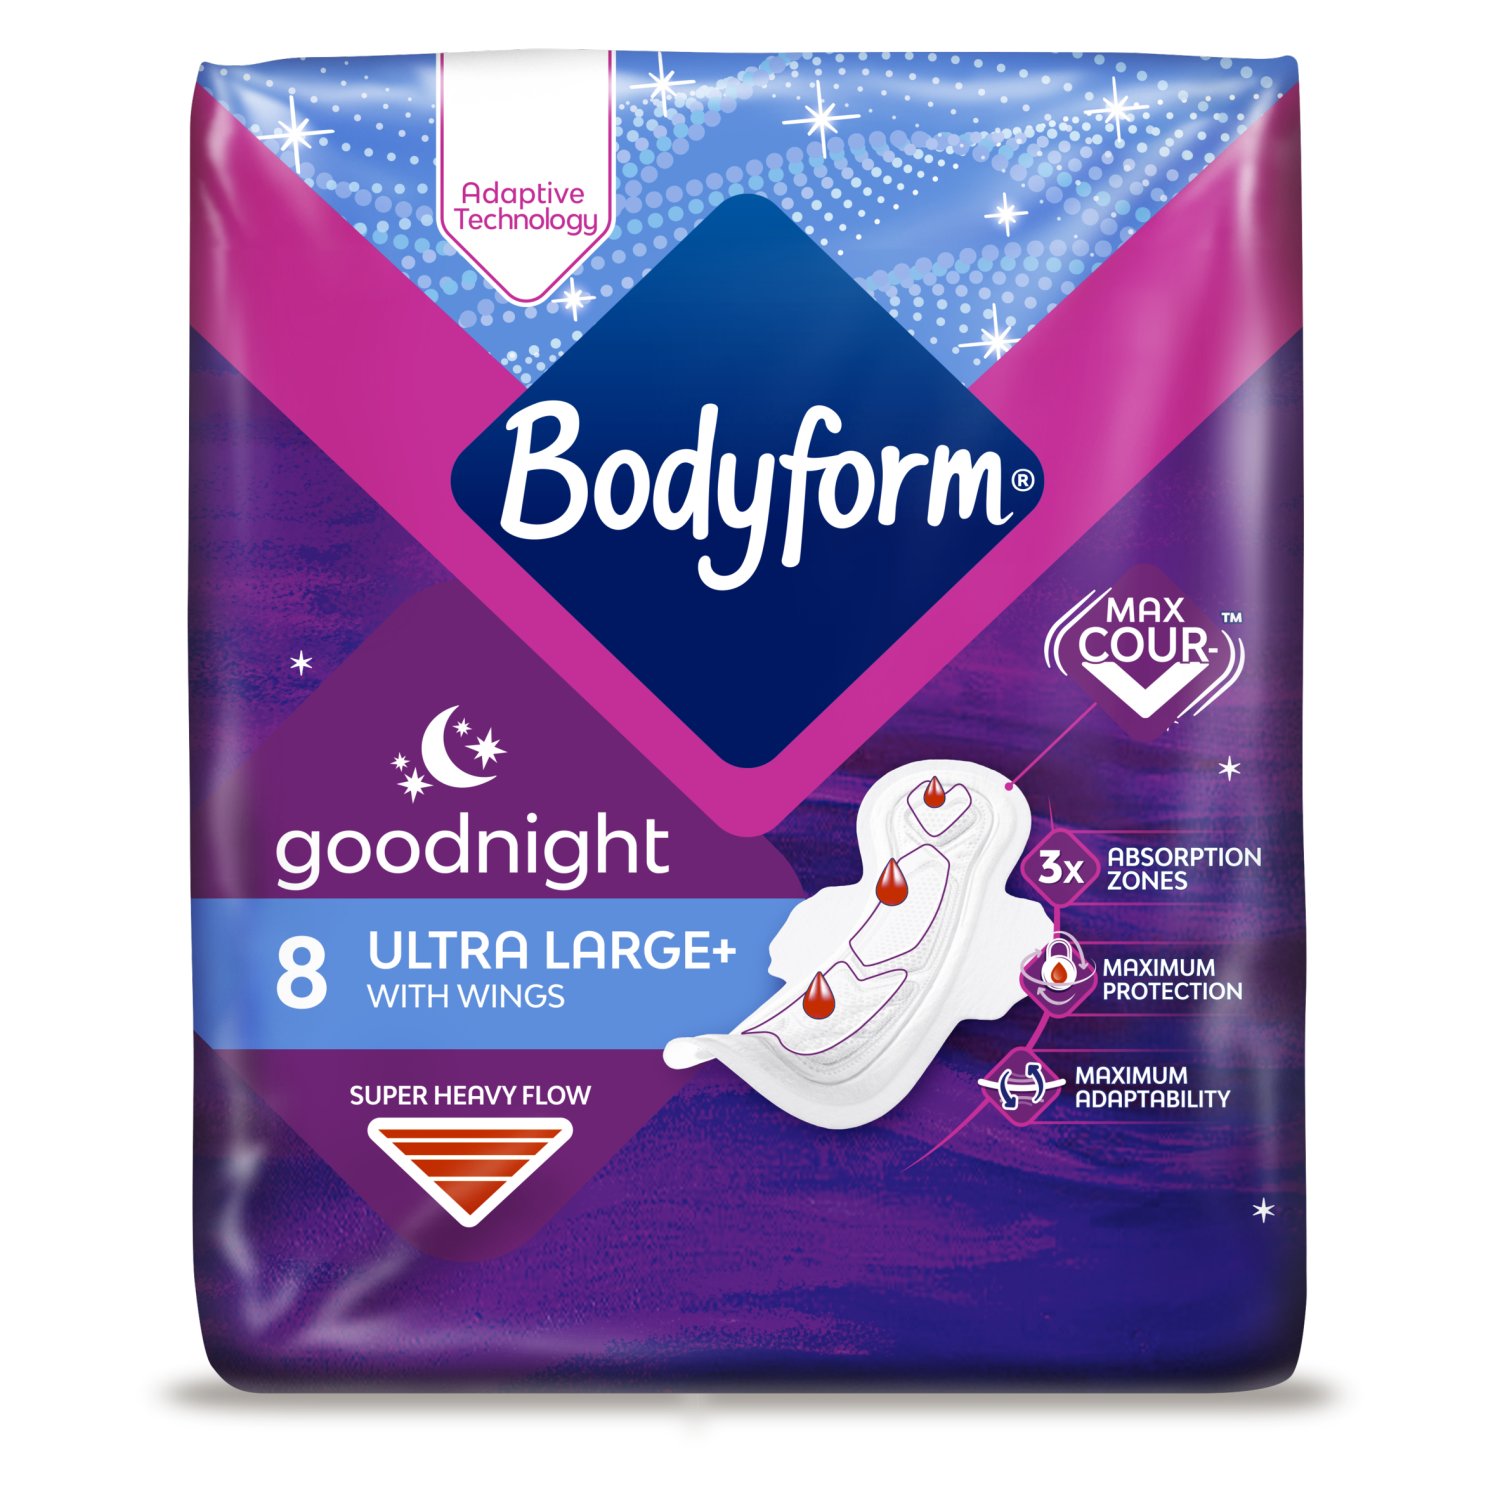 Bodyform Cour-v Ultra Night Sanitary Towels Wings 8 Pack (8 Piece)